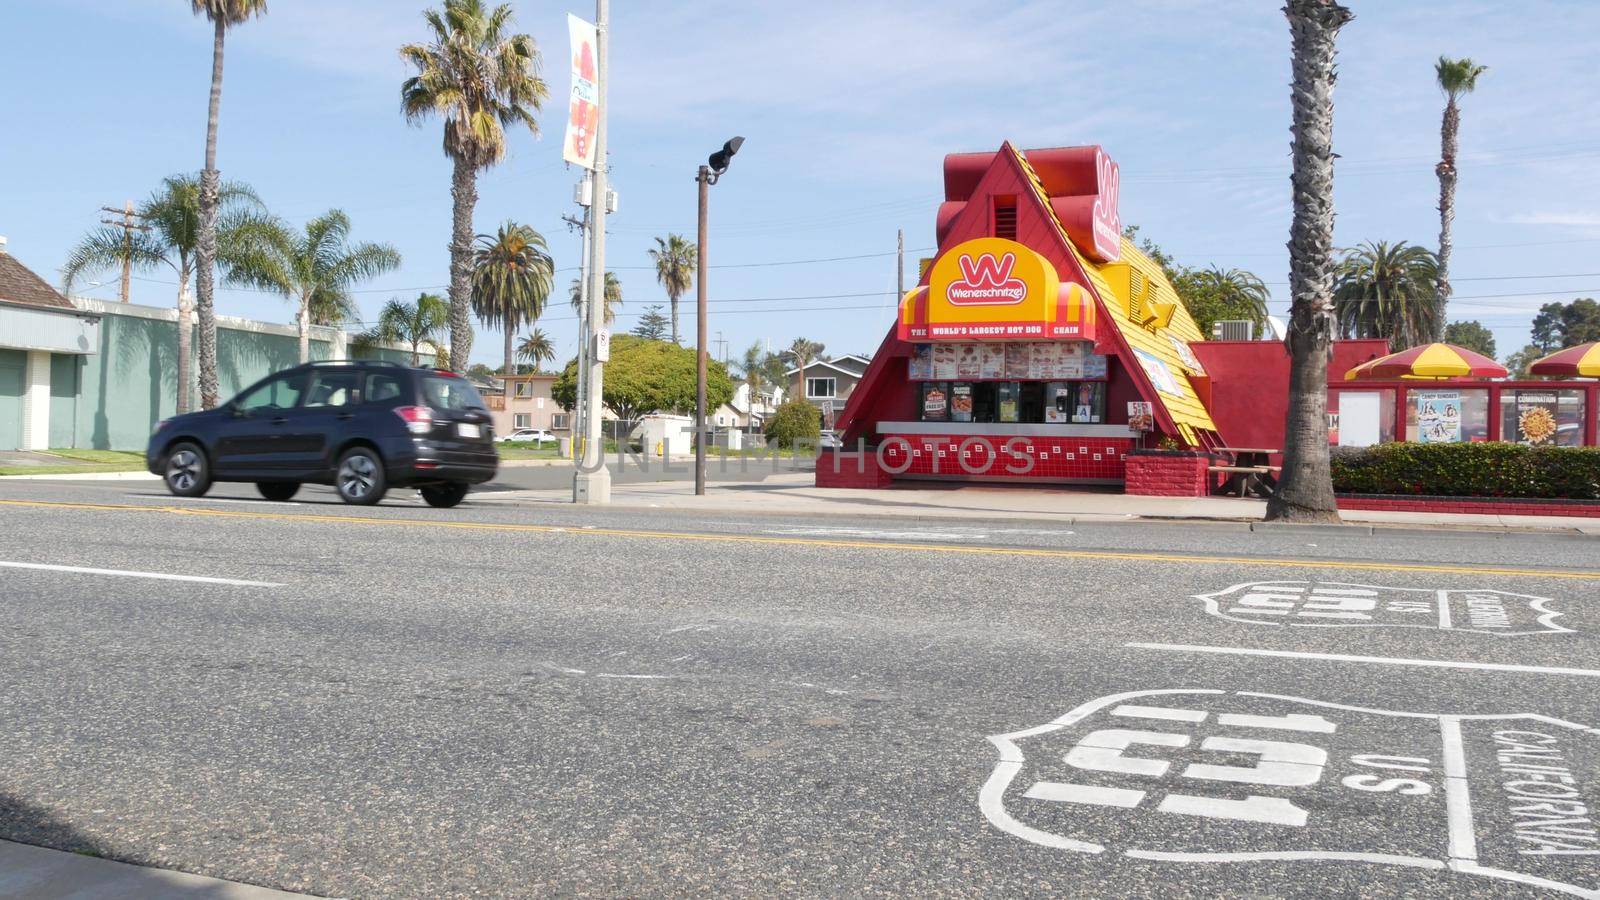 Oceanside, California USA - 20 Feb 2020: Wienerschnitzel hot dog fast food on pacific coast highway 1, historic route 101. Palm trees on street, road along ocean. Road trip vacations in united states.